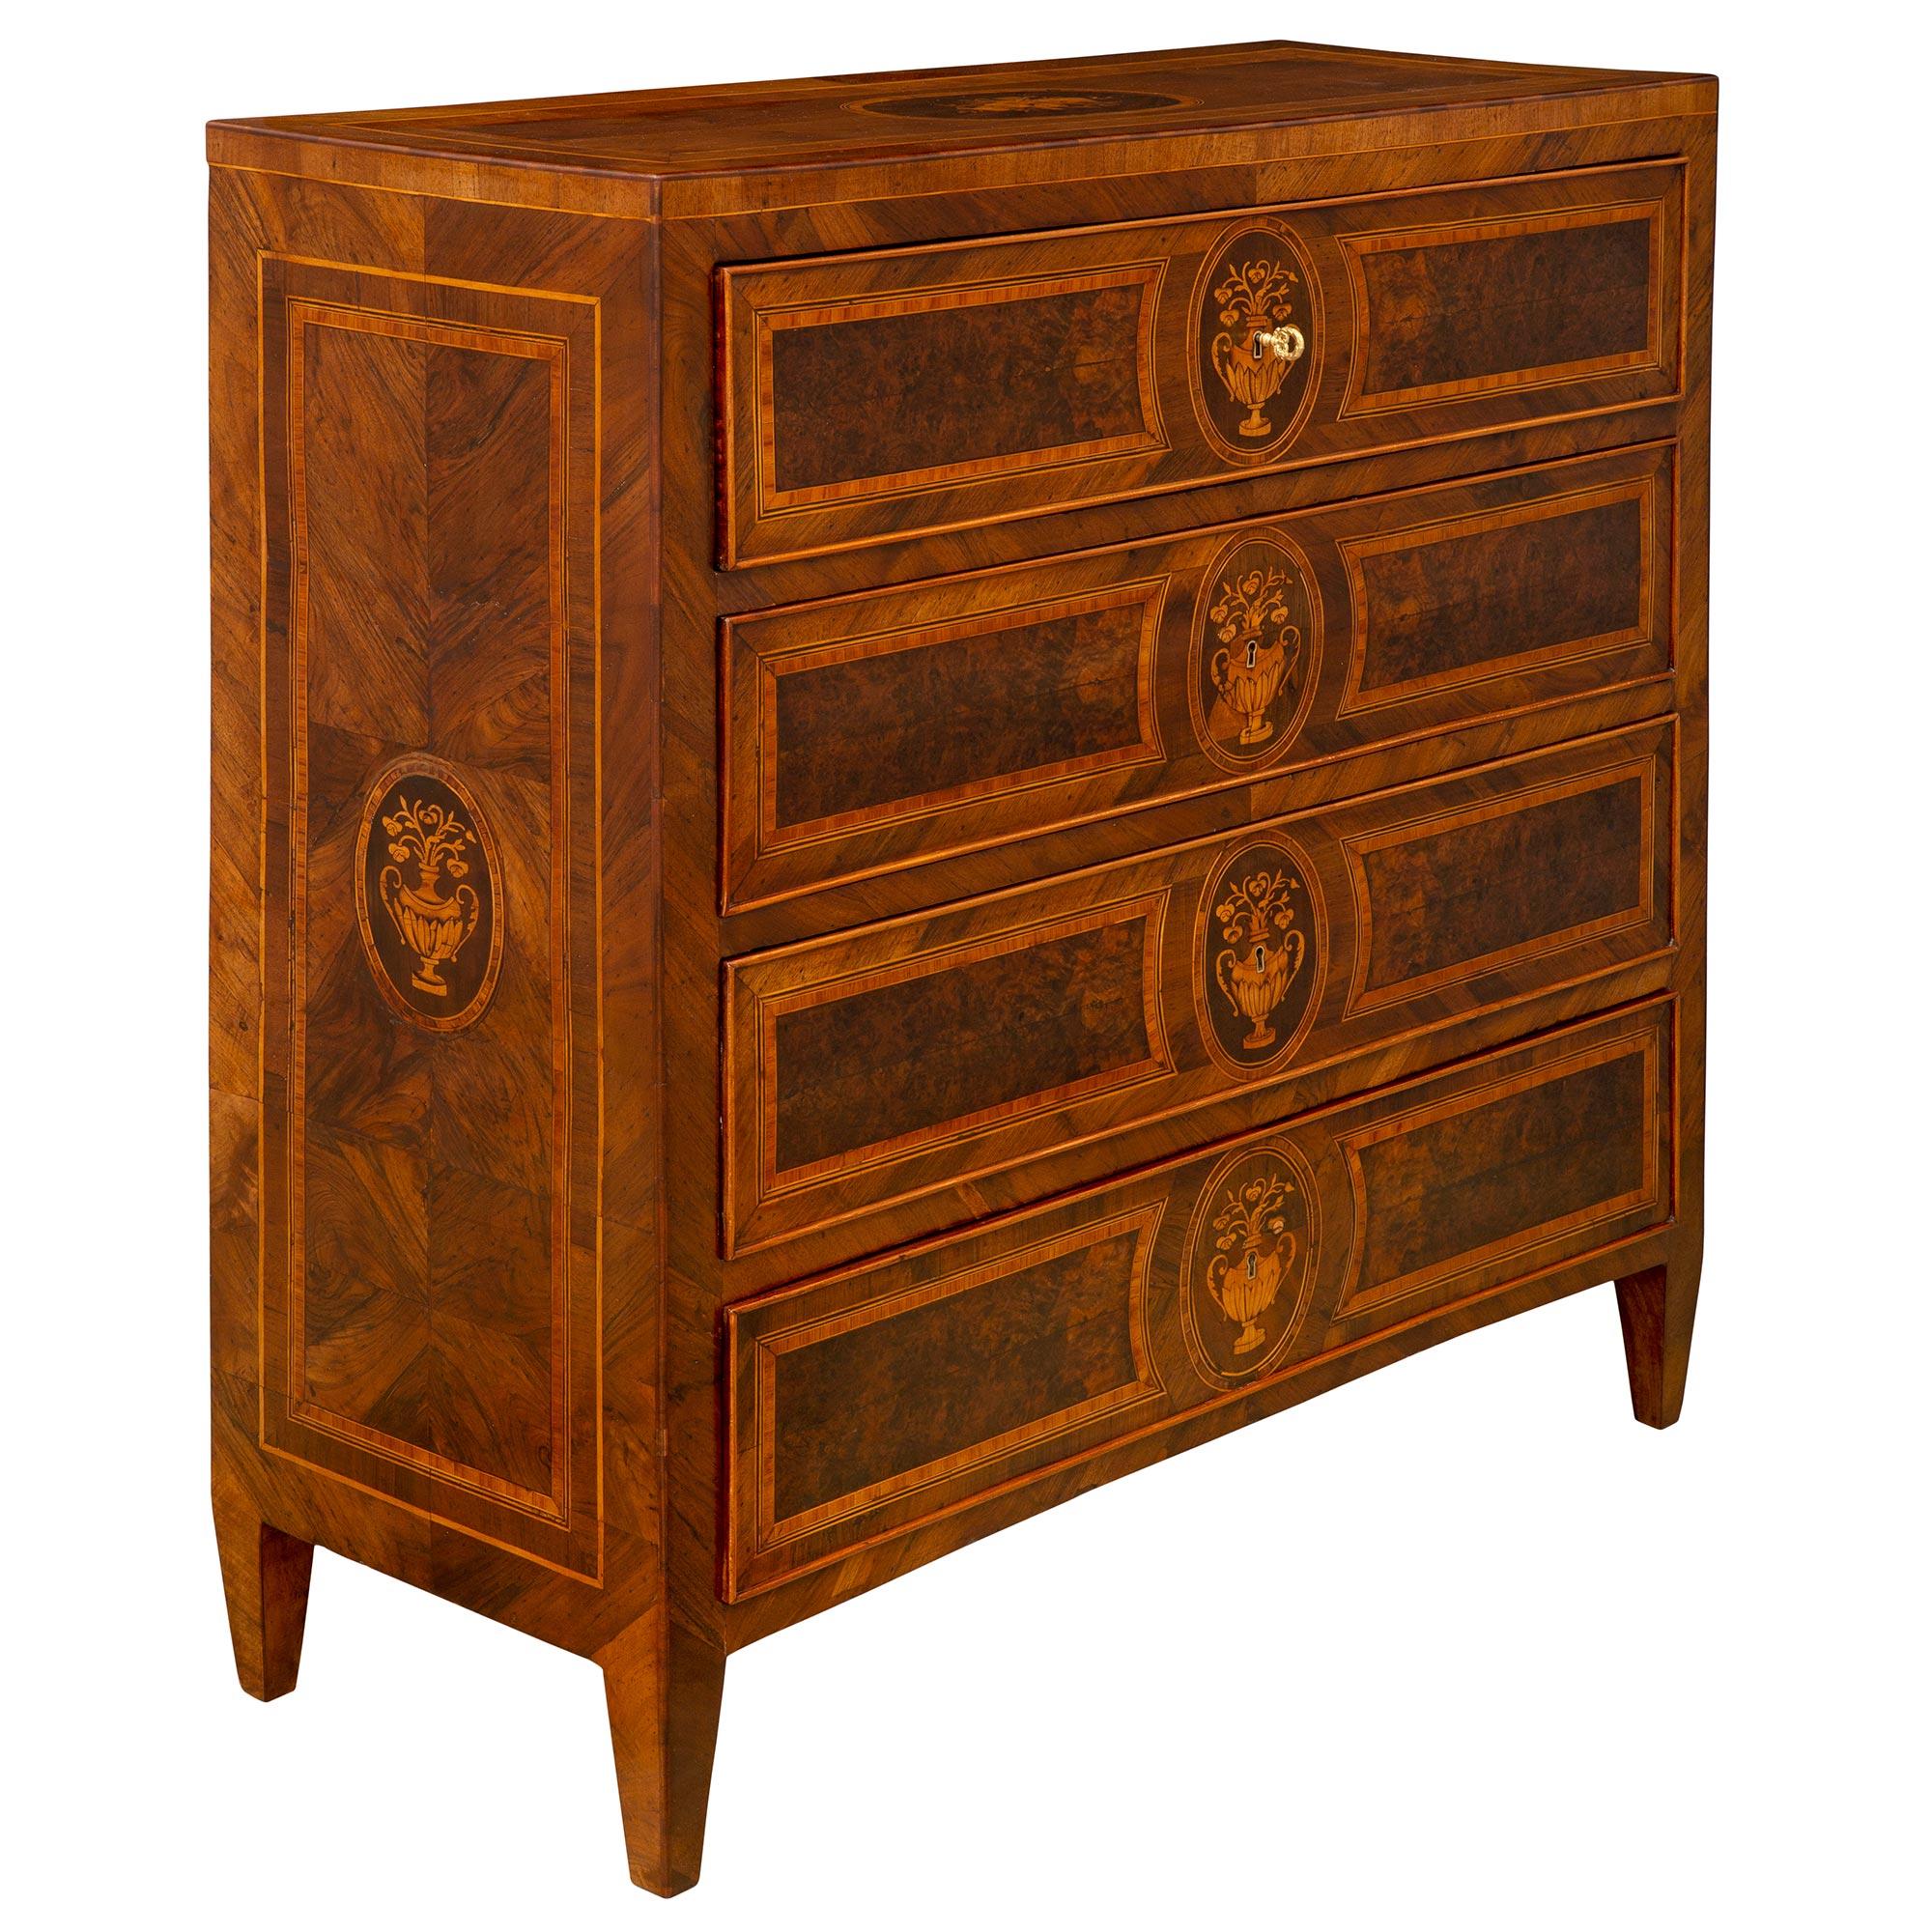 Italian 18th Century Louis XVI Period Walnut, Burl Walnut, And Tulipwood Commode In Good Condition For Sale In West Palm Beach, FL